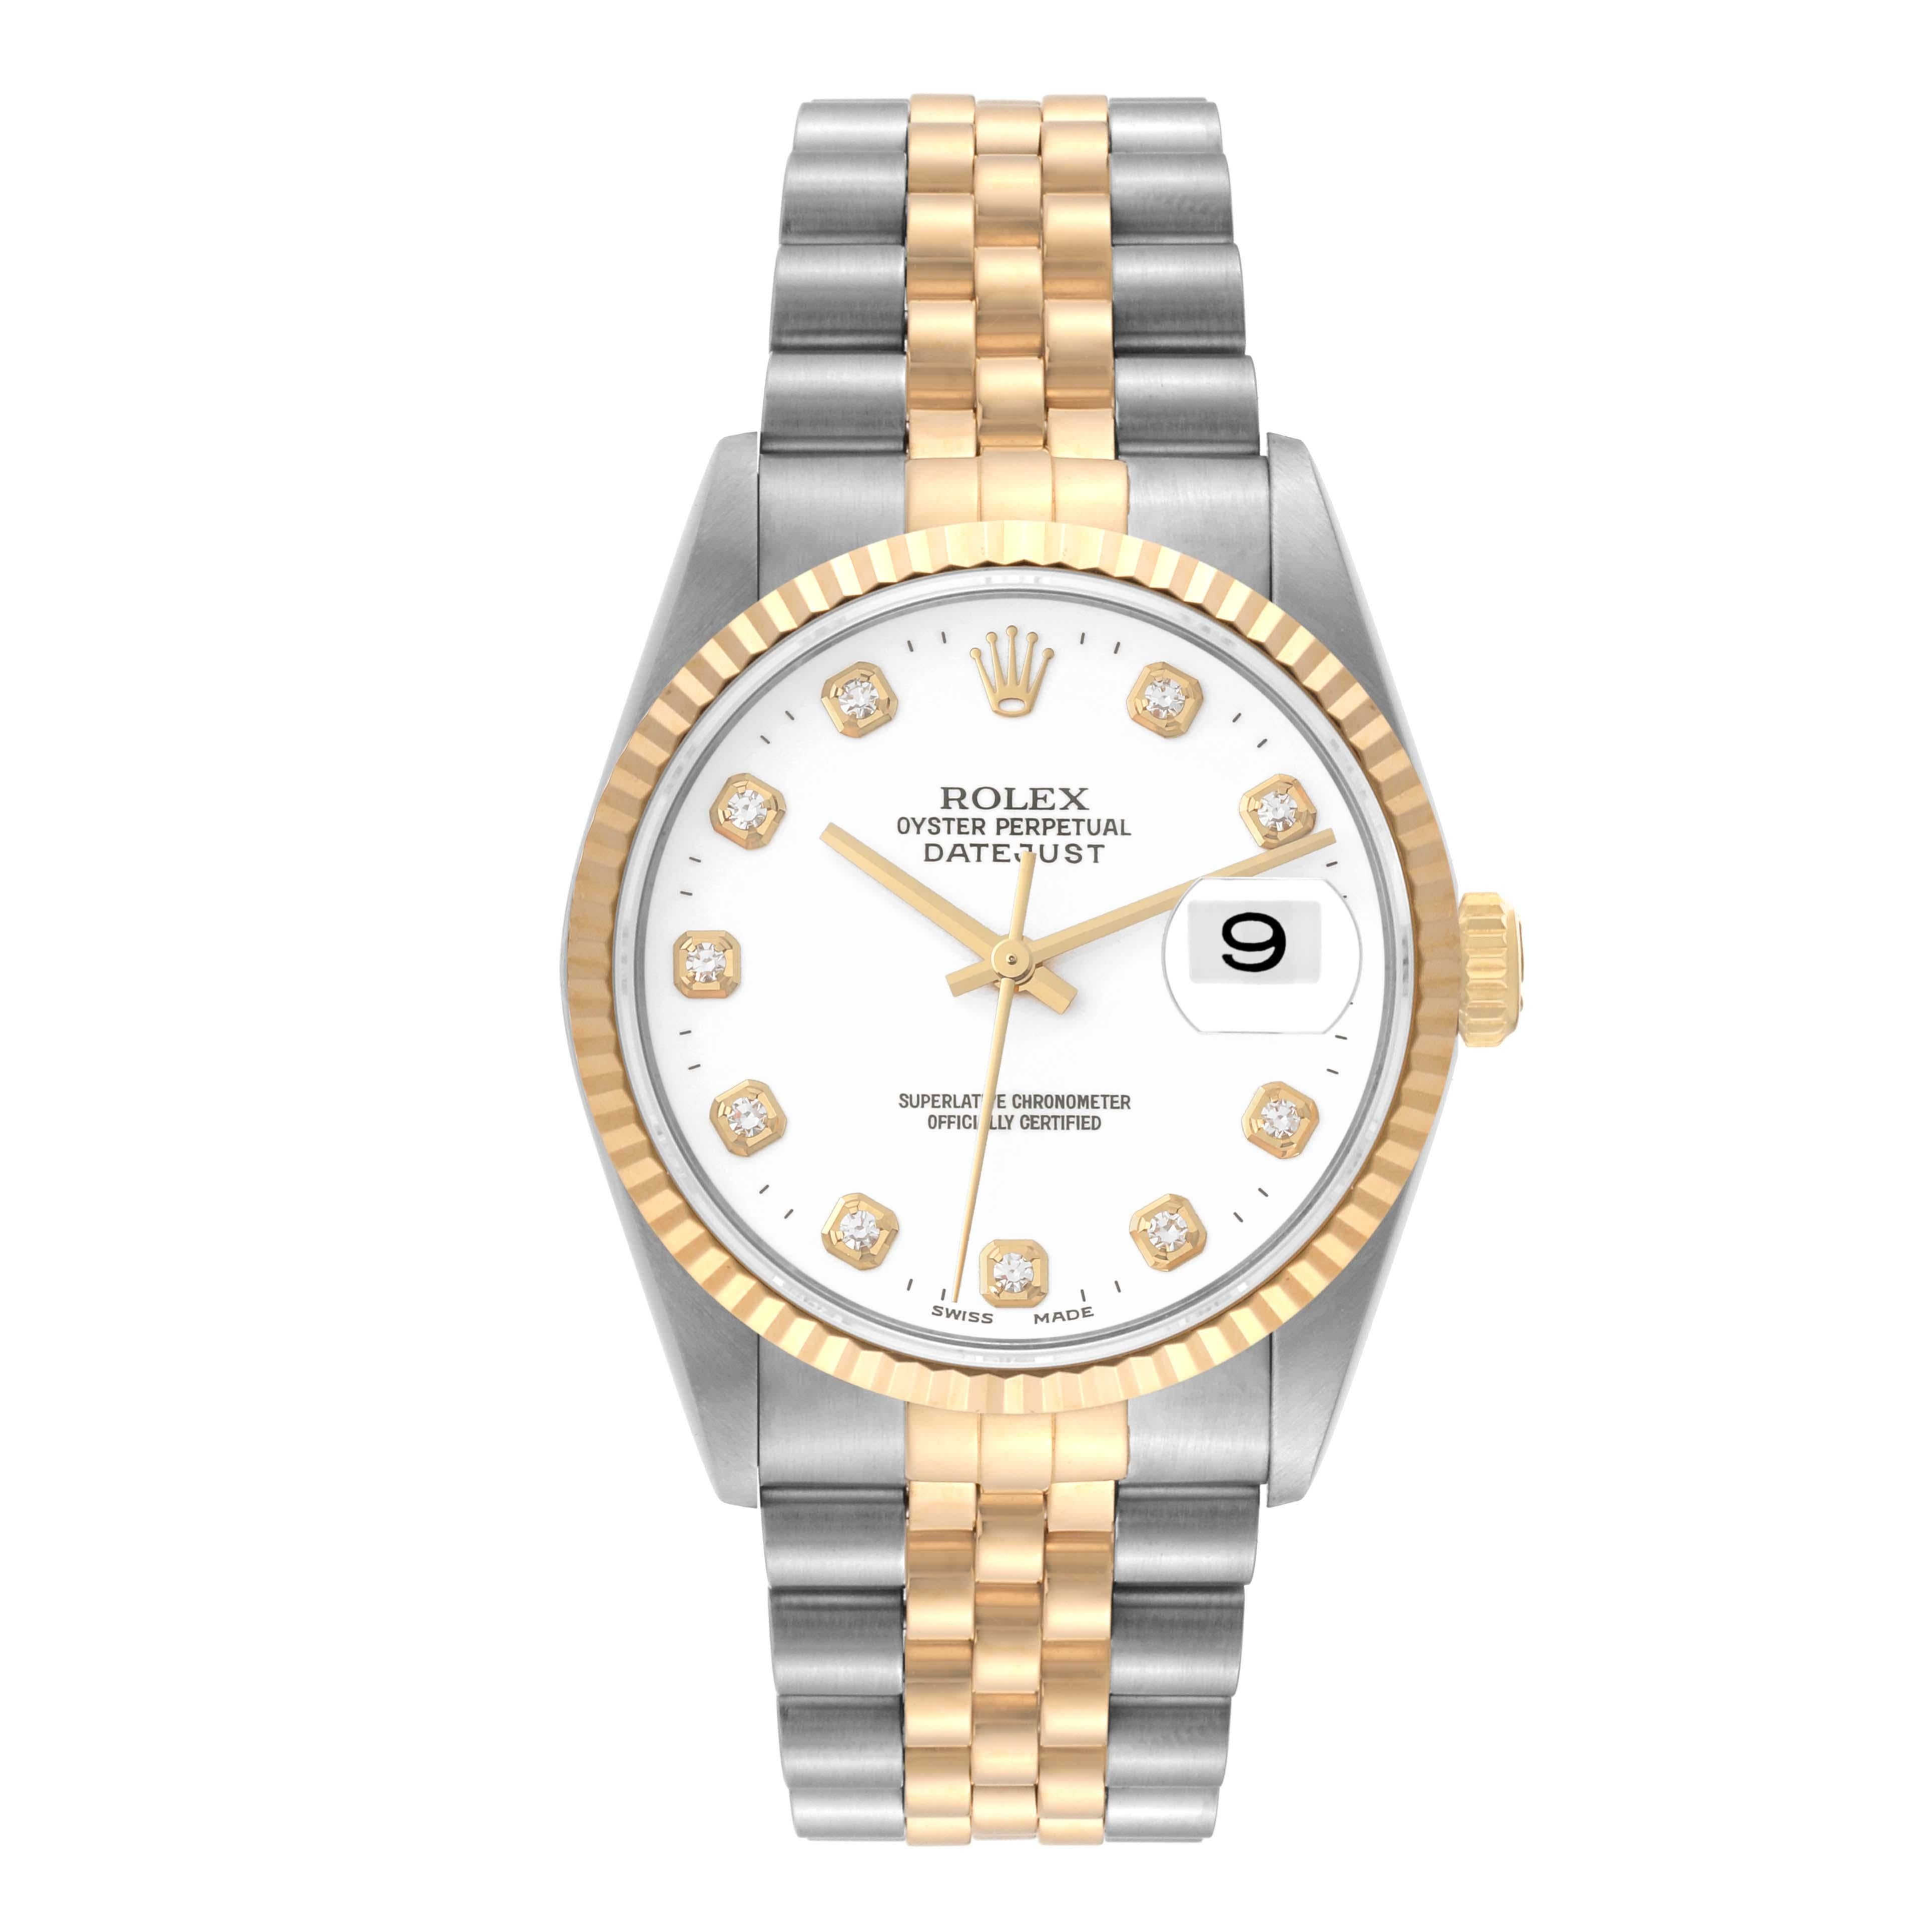 Rolex Datejust Diamond Dial Steel Yellow Gold Mens Watch 16233 For Sale 4